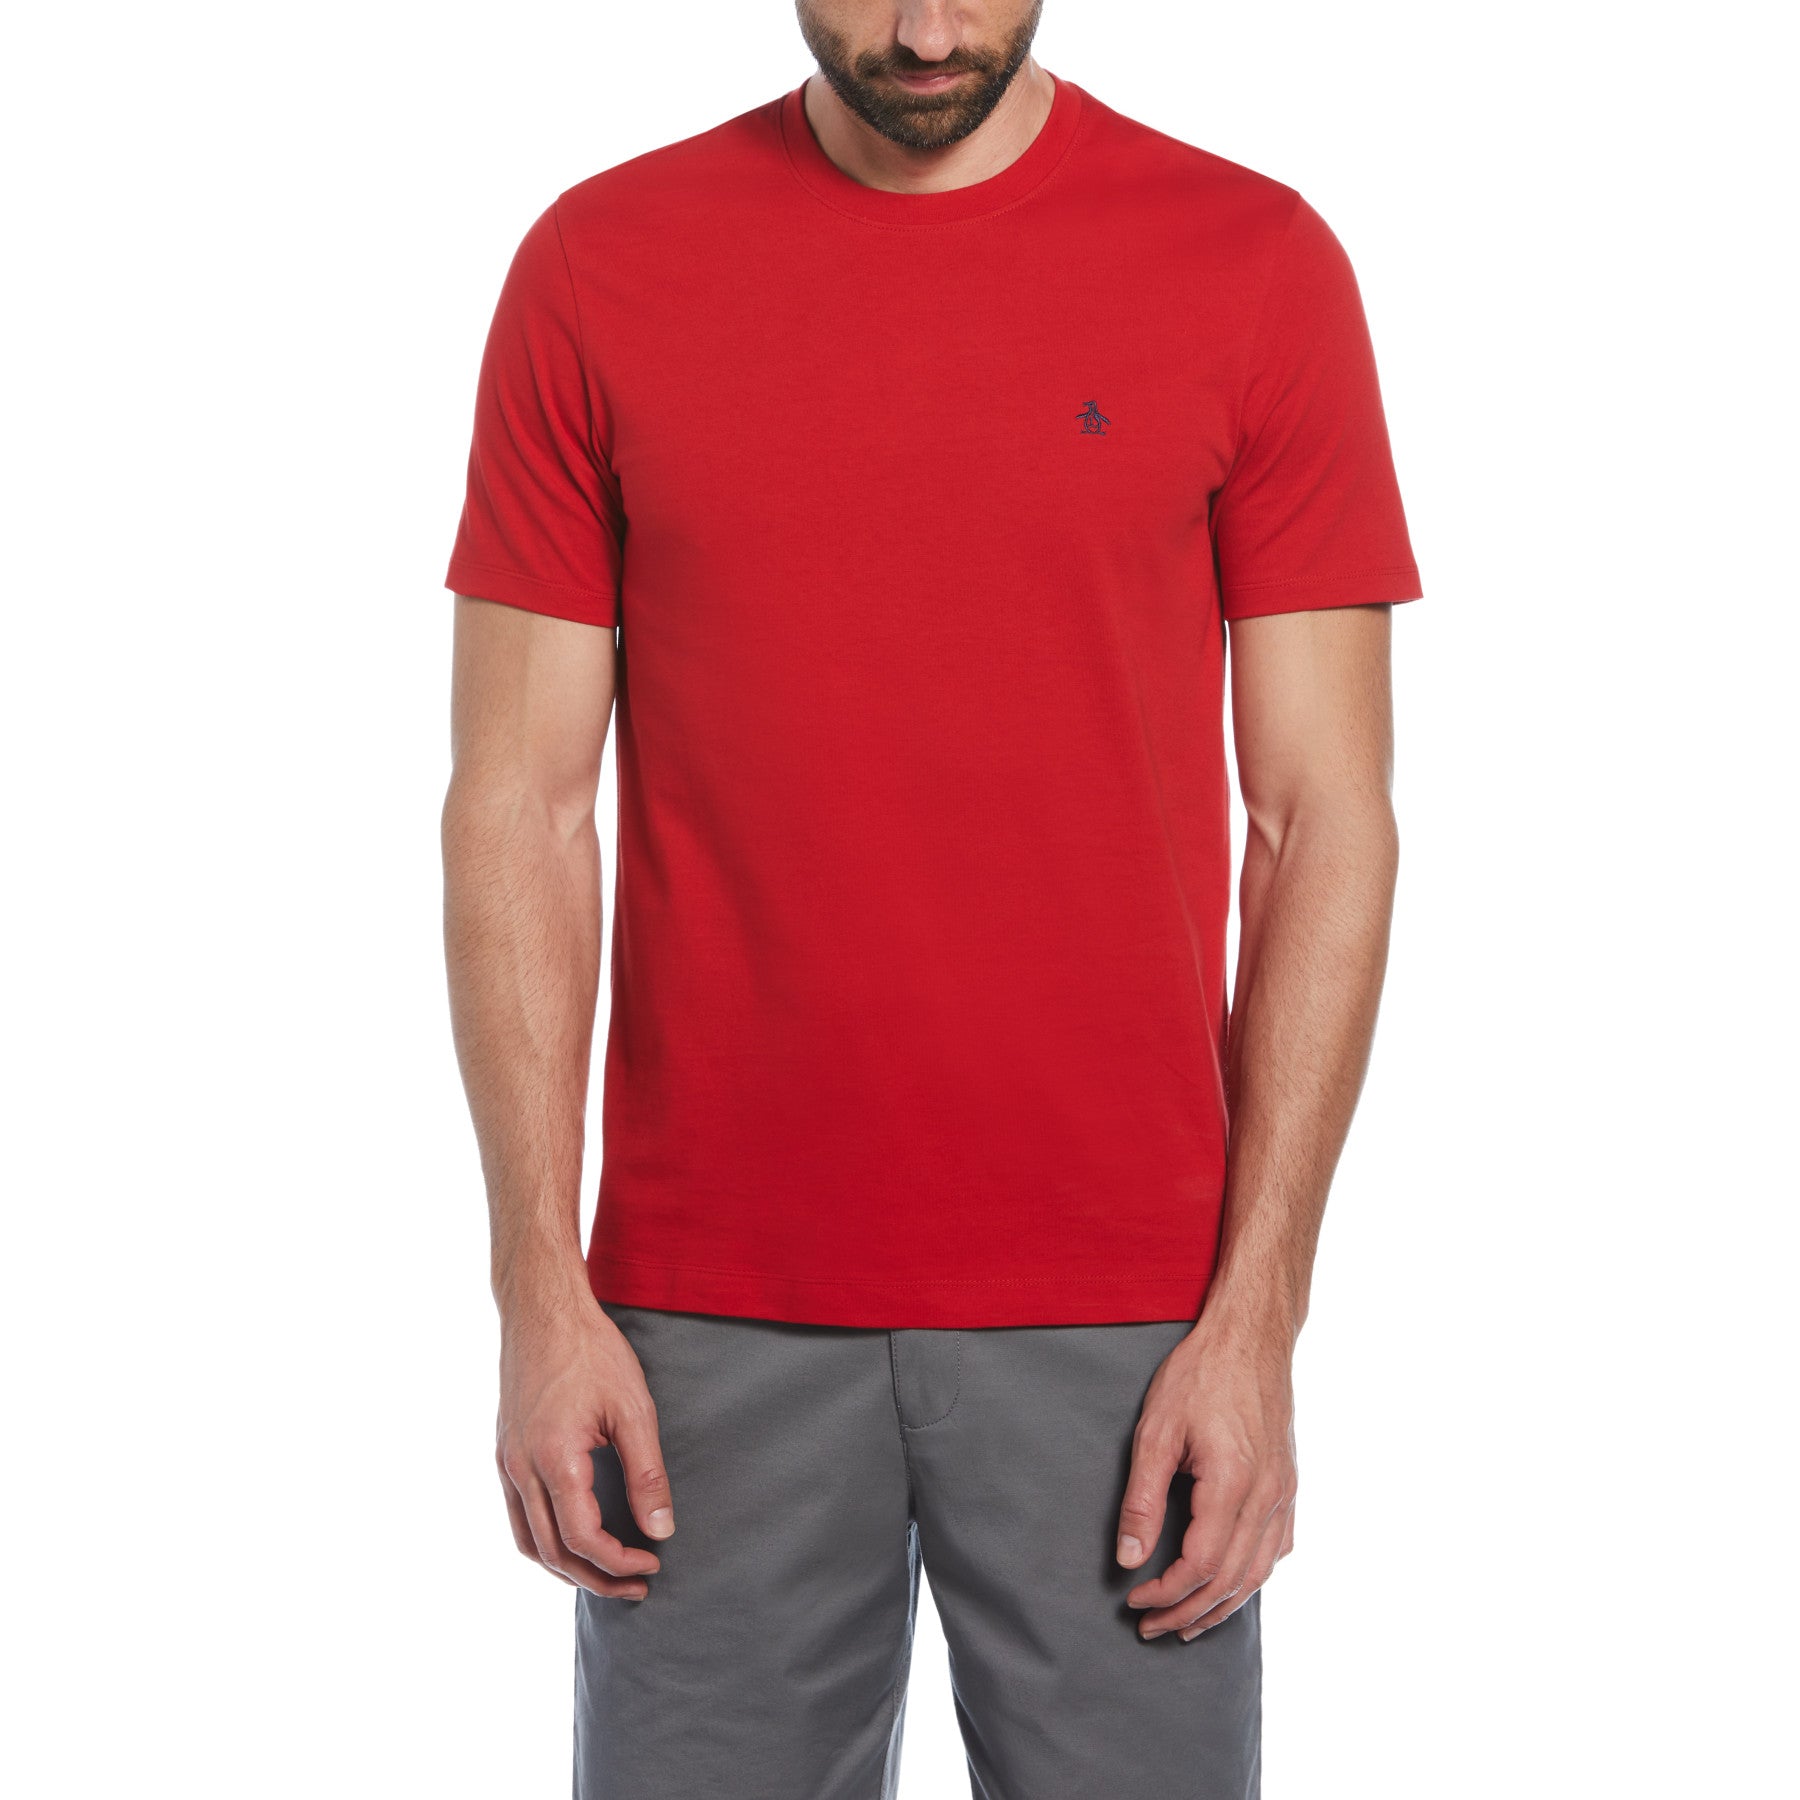 View Original Penguin Pin Point Embroidered Pete TShirt In Salsa Red Mens information